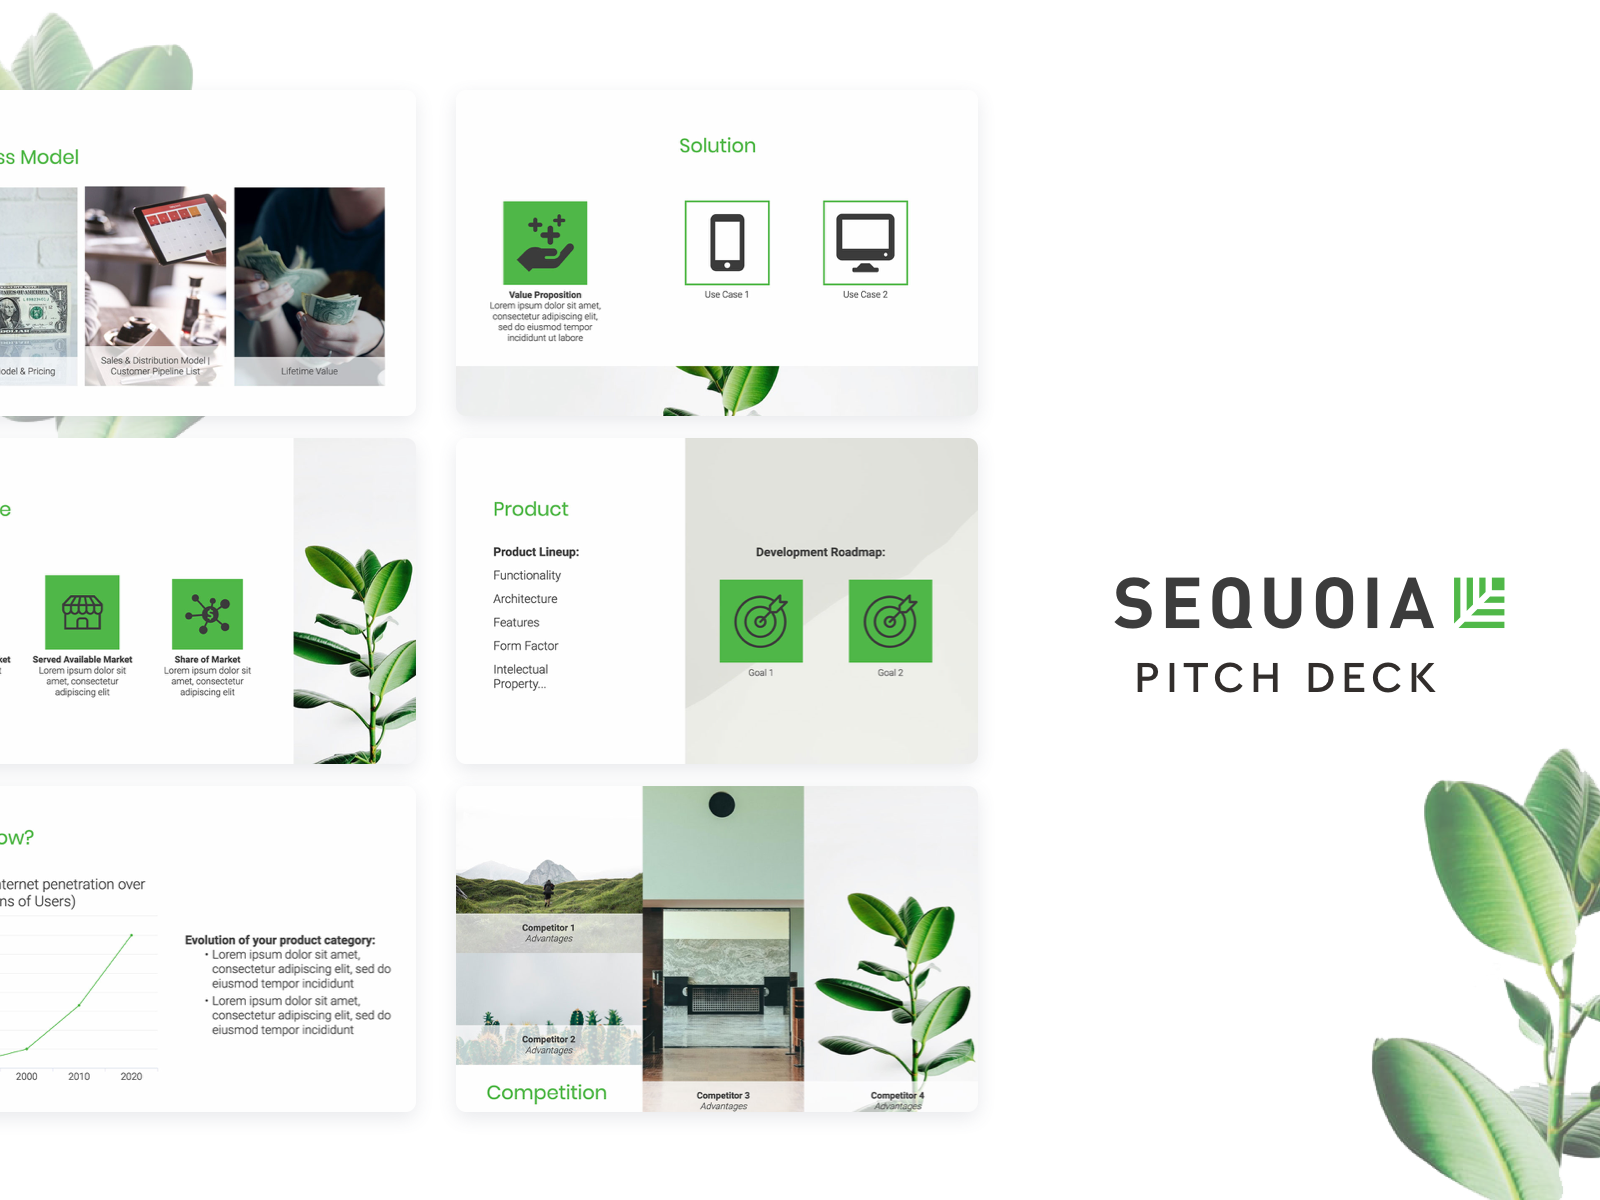 Sequoia Capital Pitch Deck Template by Slidebean Presentation and